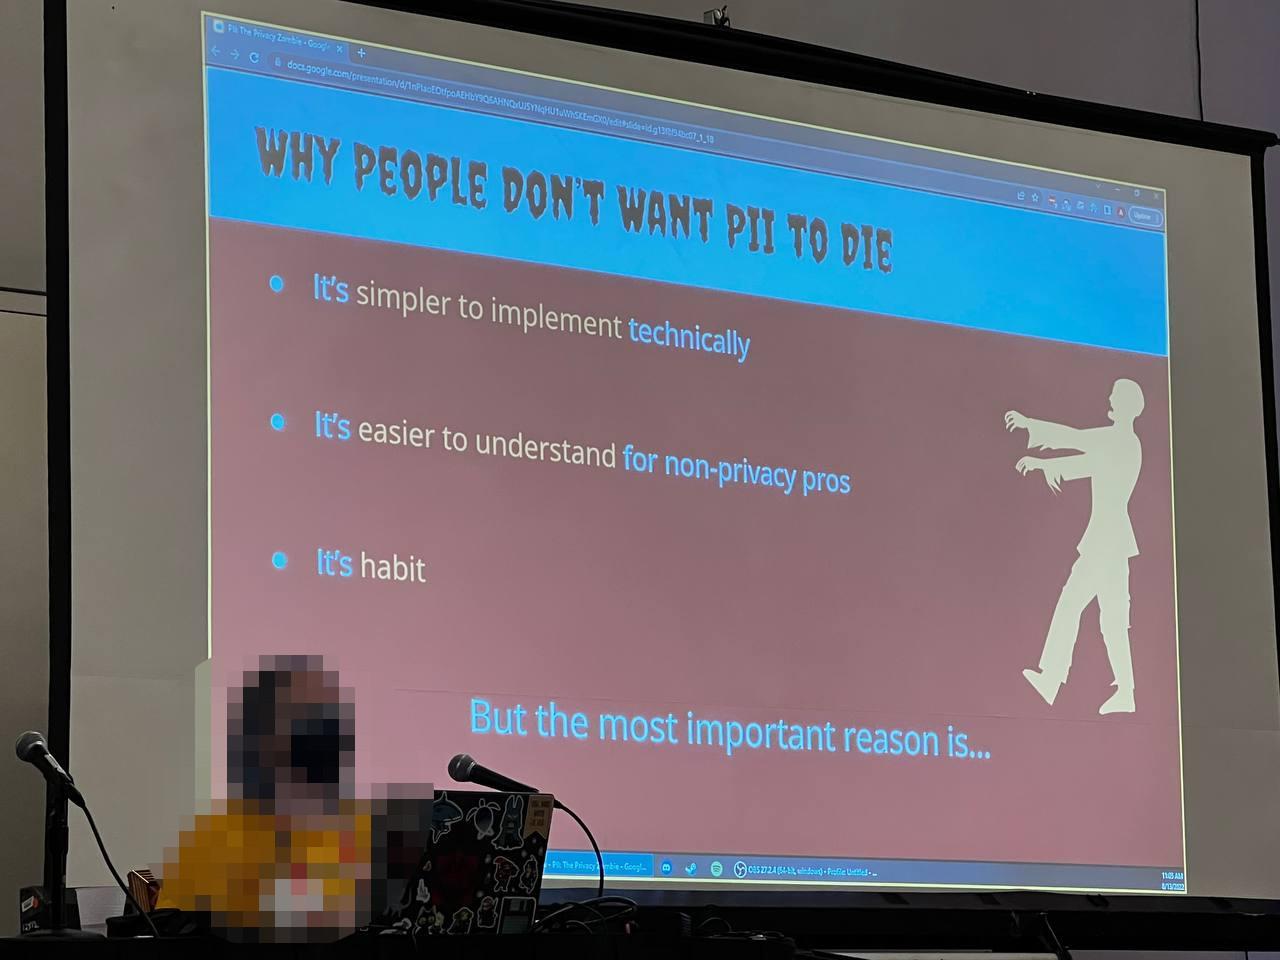 Why people don't want P I I to die. It is simpler to implement technically, easier to understand for non-privacy professionals, it is habit. The most important reason is... (the slide ends here)